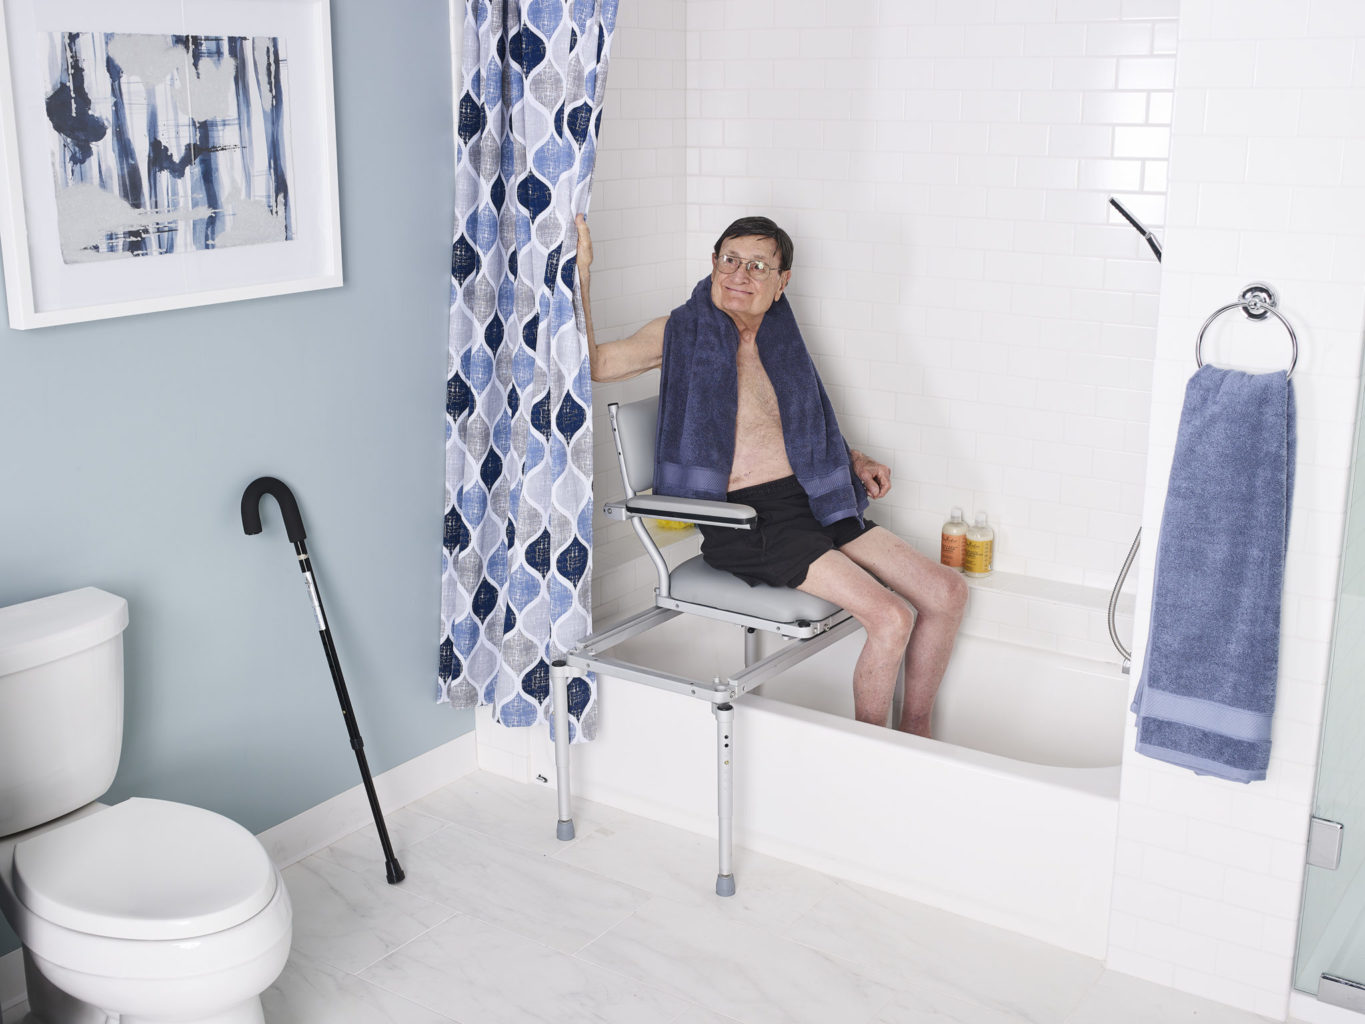 How To Use A Tub Transfer Bench With A Shower Curtain